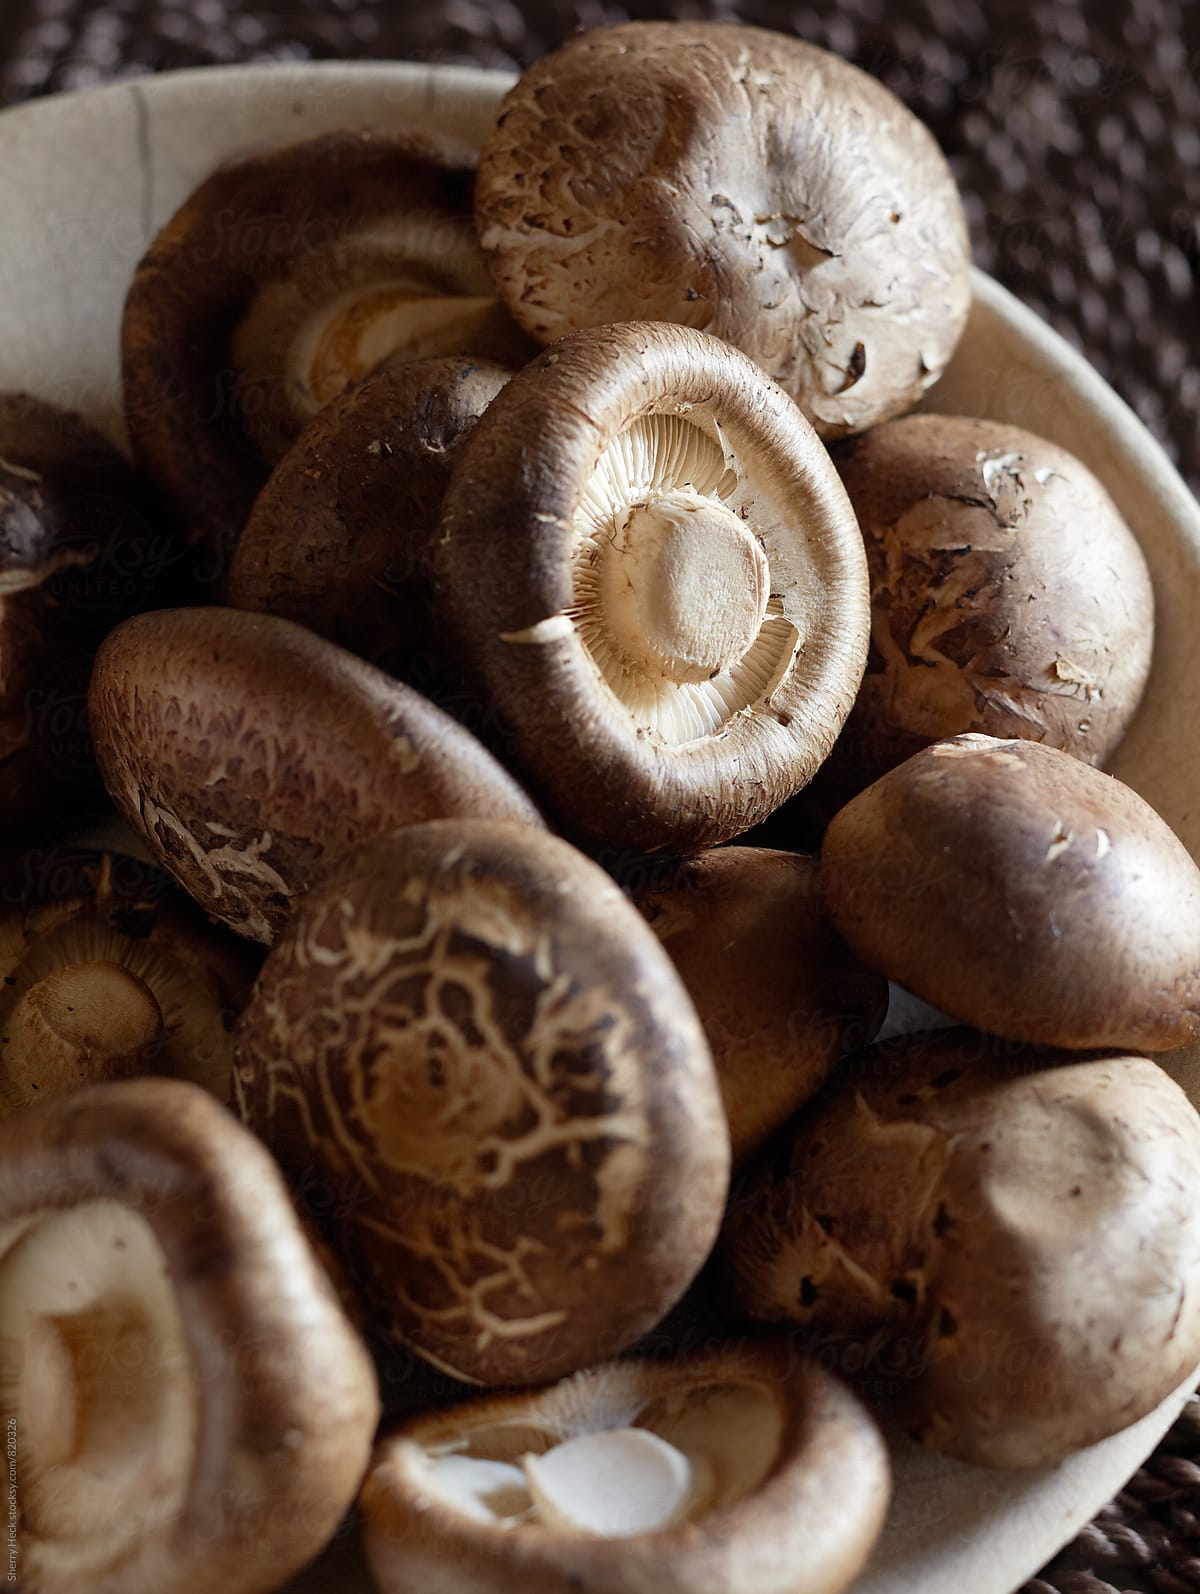 White bowl of brown mushrooms showing texture